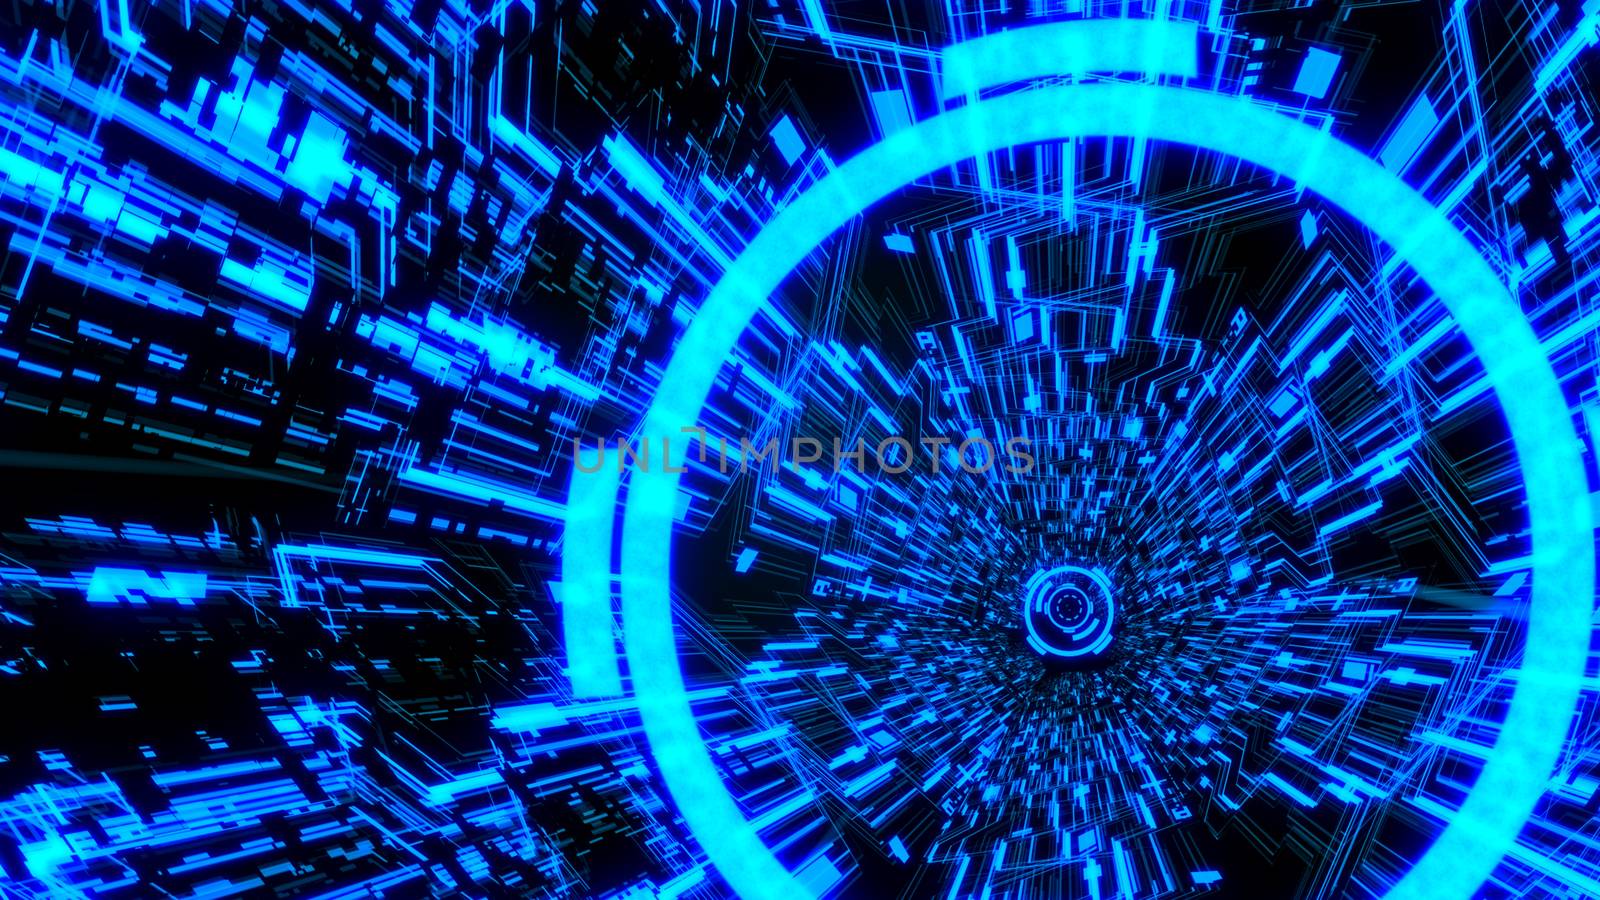 3D Digital Circuit System Tunnels and Waves with Digital Circles in the middle in Blue color theme Background Ver.5 by ariya23156